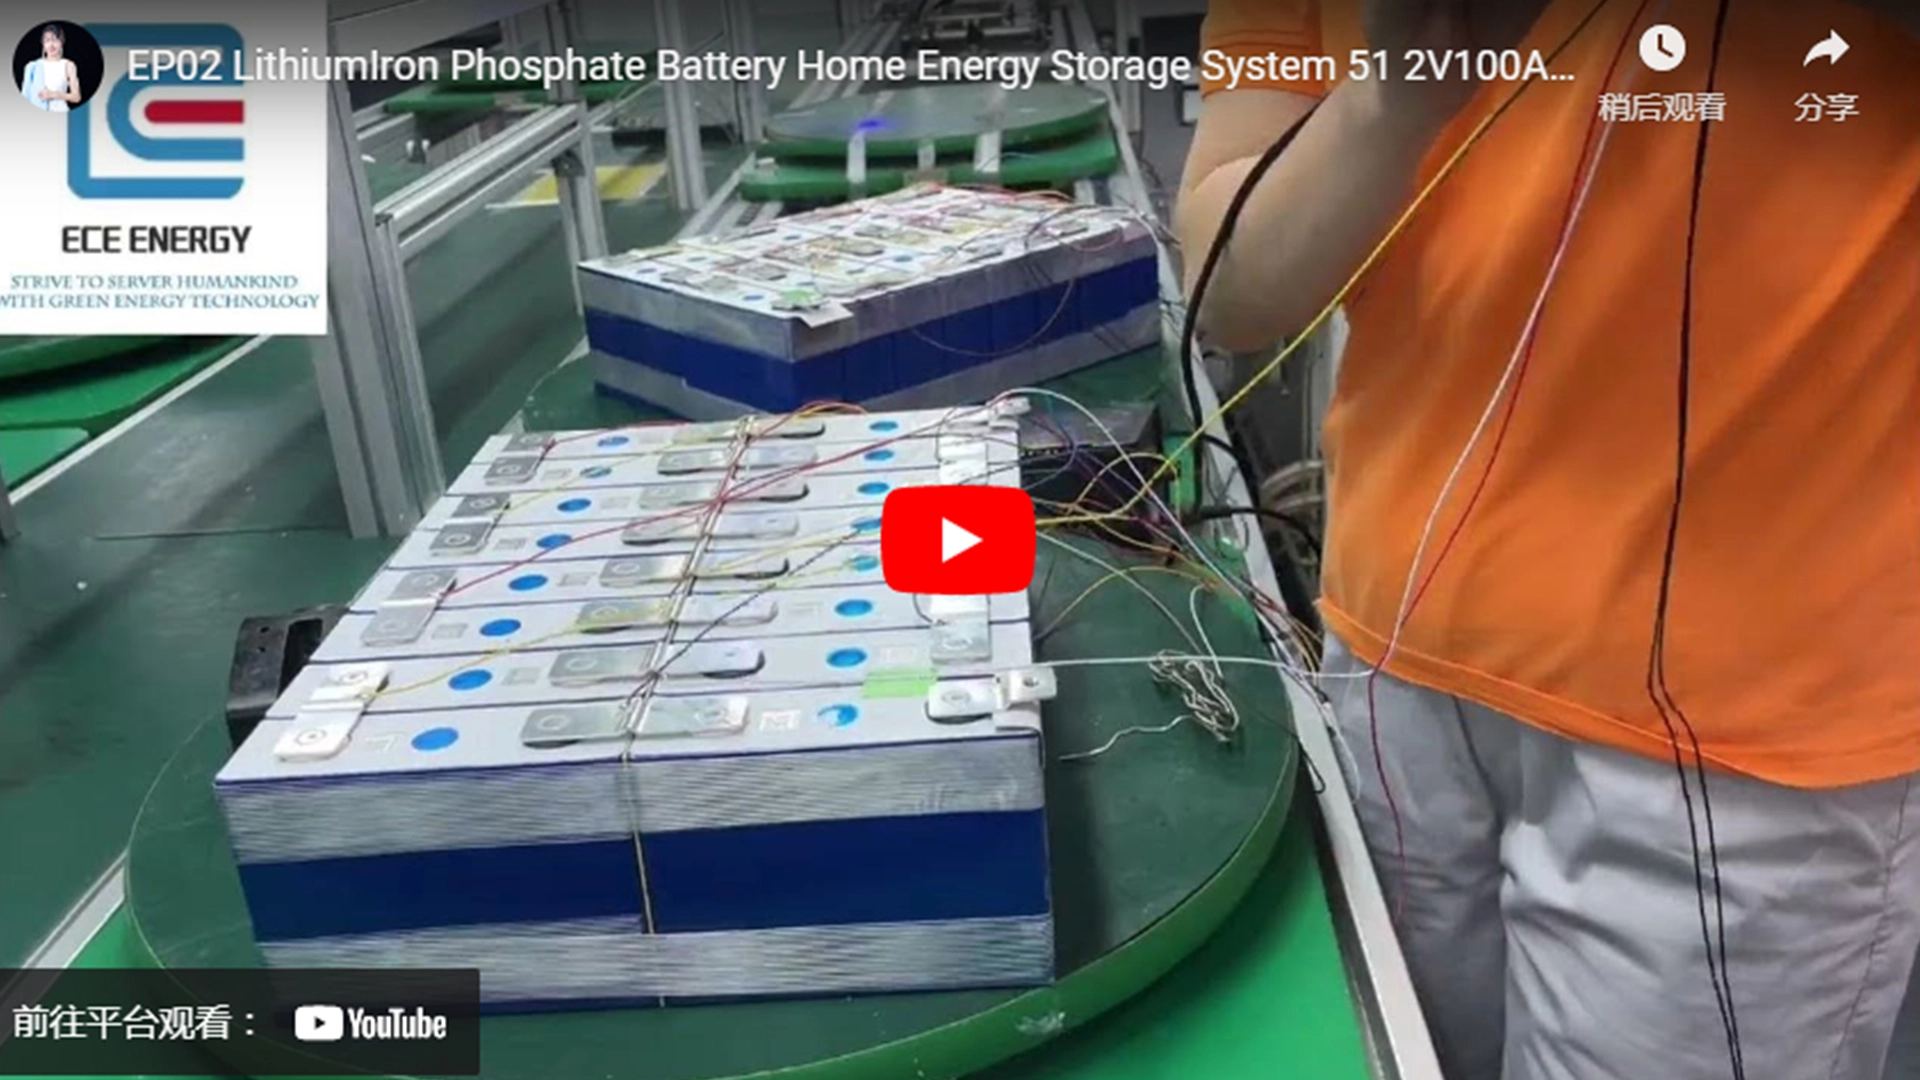 EP02 LithiumIron Phosphate Battery Home Energy Storage System 51.2V100AH